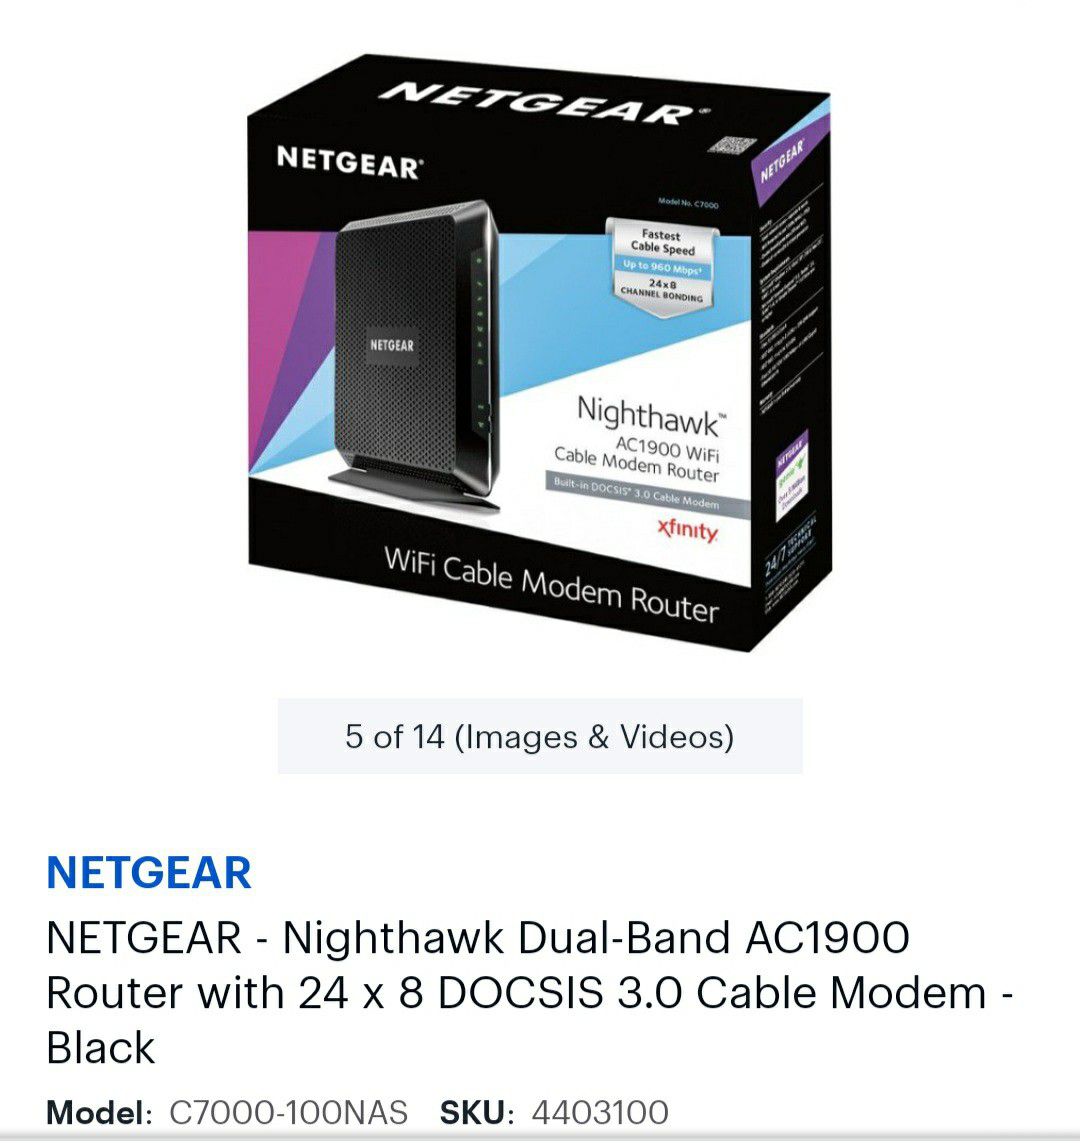 Nighthawk AC1900 wifi cable modem router C7000